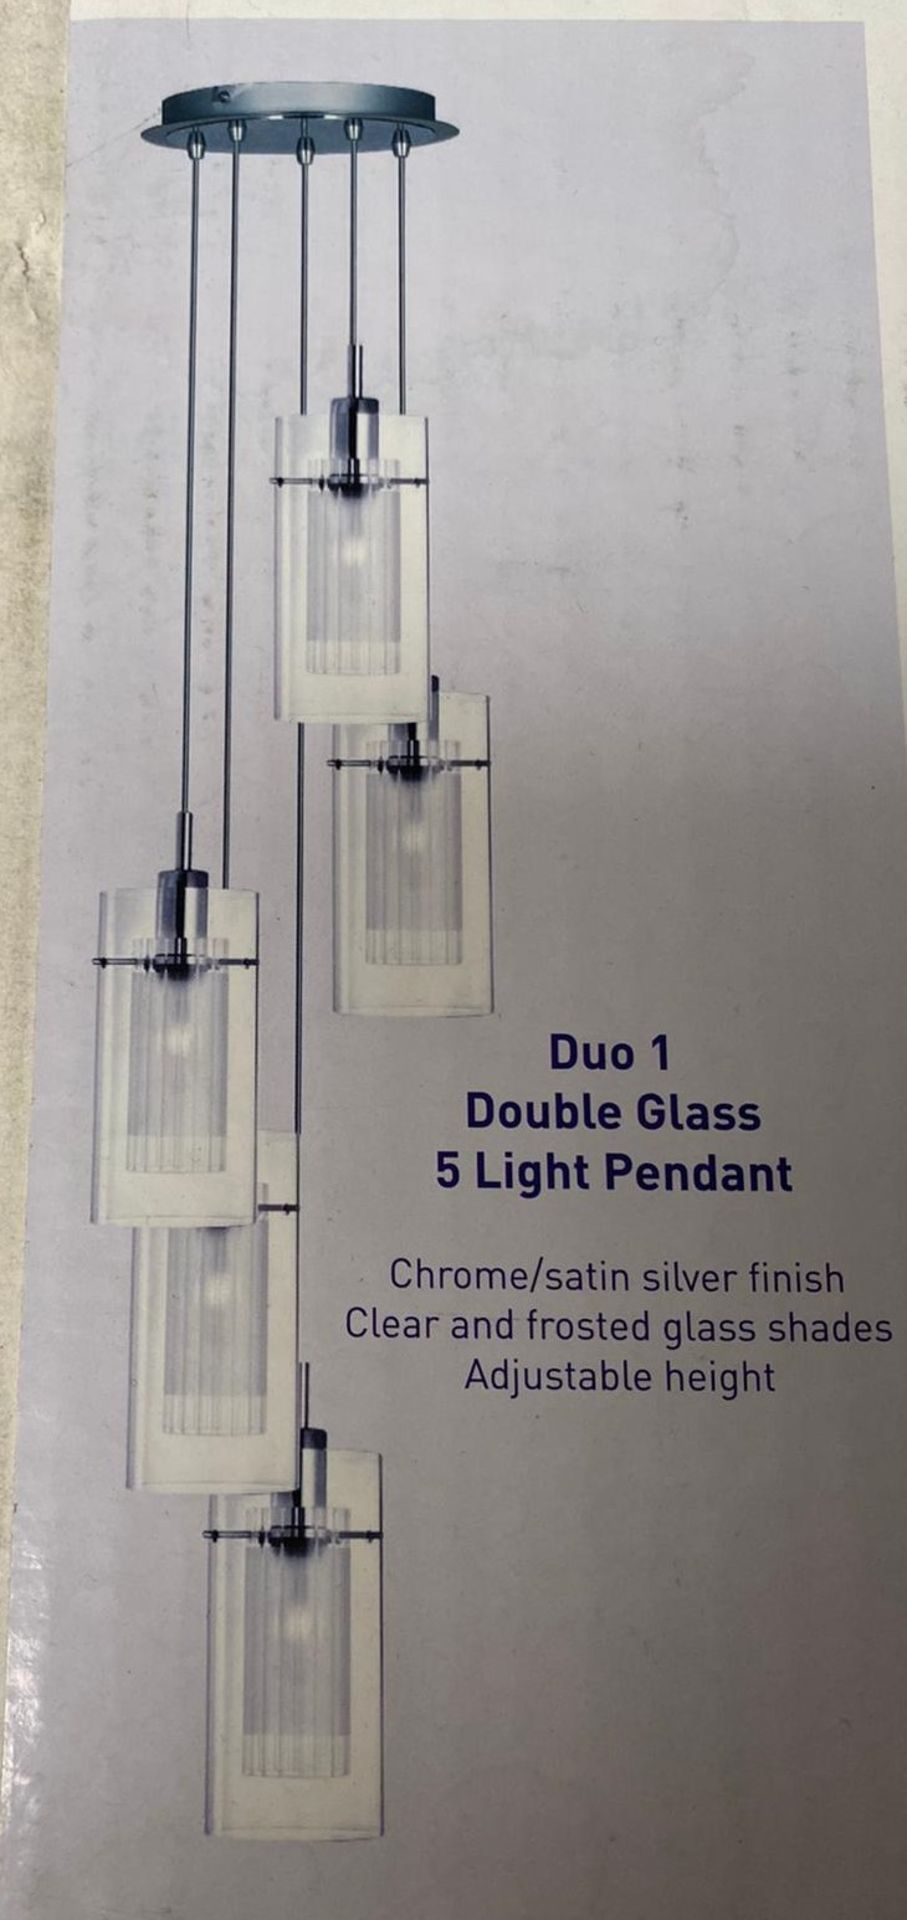 1 x Searchlight Duo 1 Double glass light pendant - Ref: 2305-5 - New and Boxed stock - RRP: £160 - Image 2 of 4